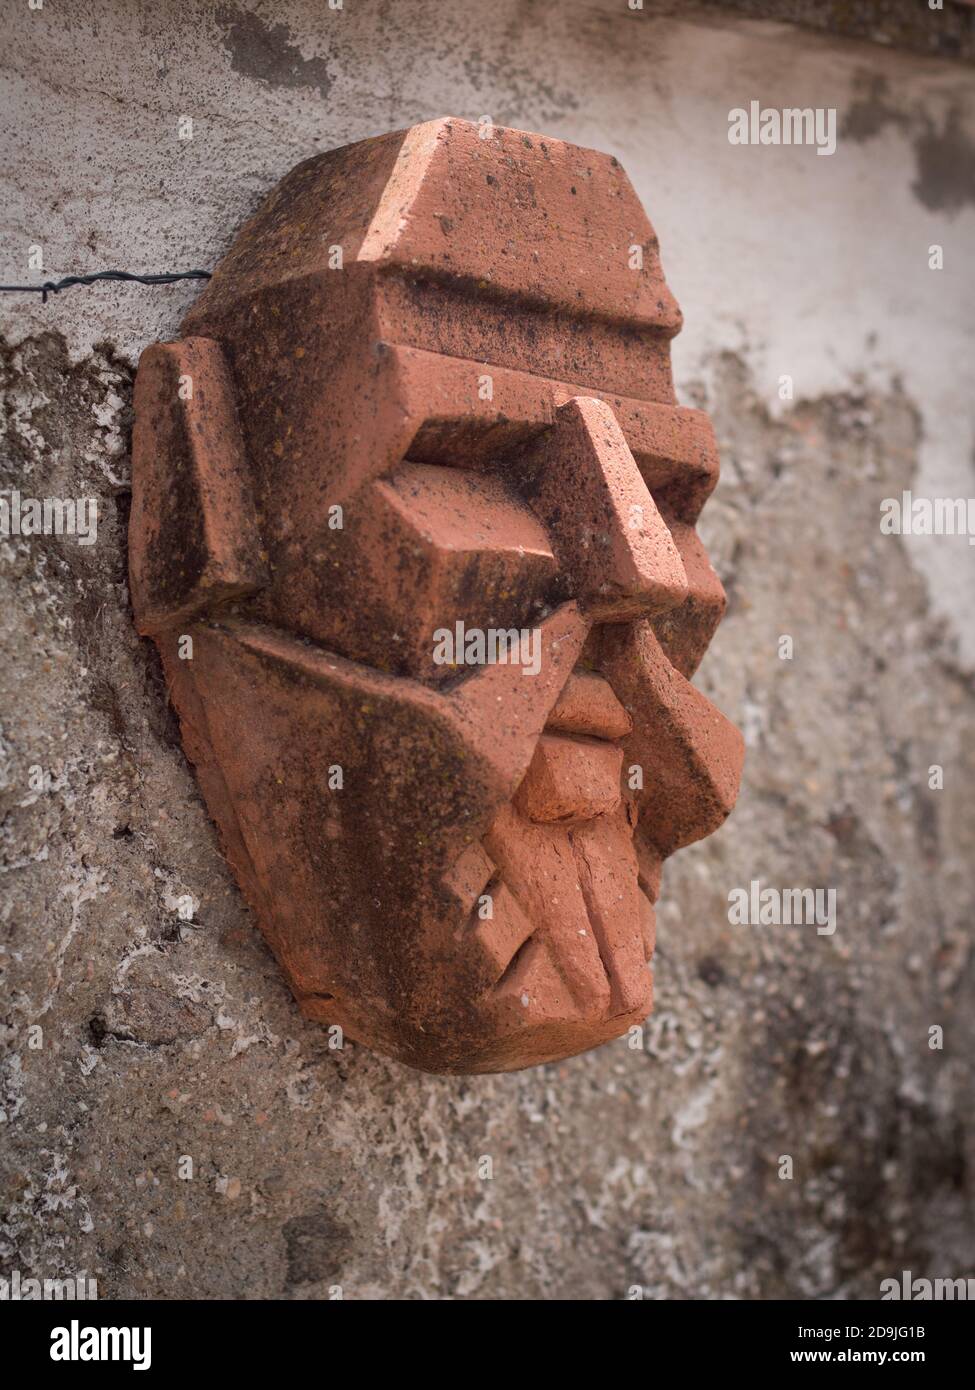 Side view of terracota male mask hanged on a walk. Stock Photo